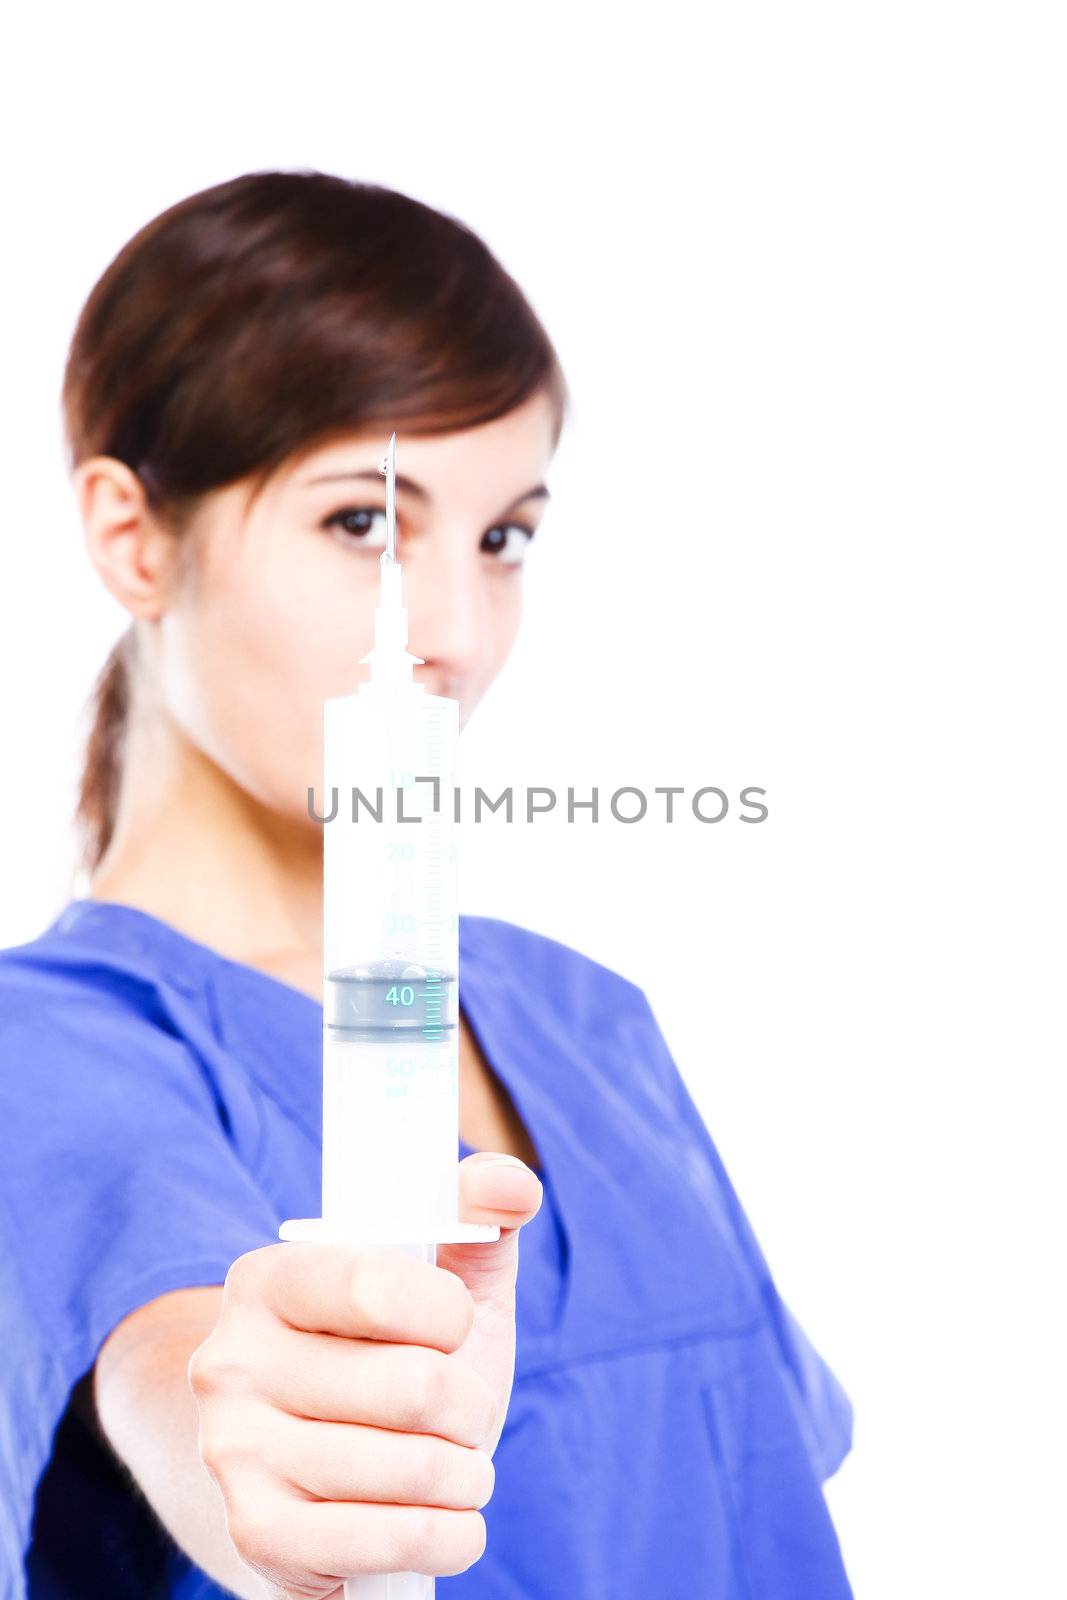 Conceptual Photo Of A Young Nurse Showing A Syringe